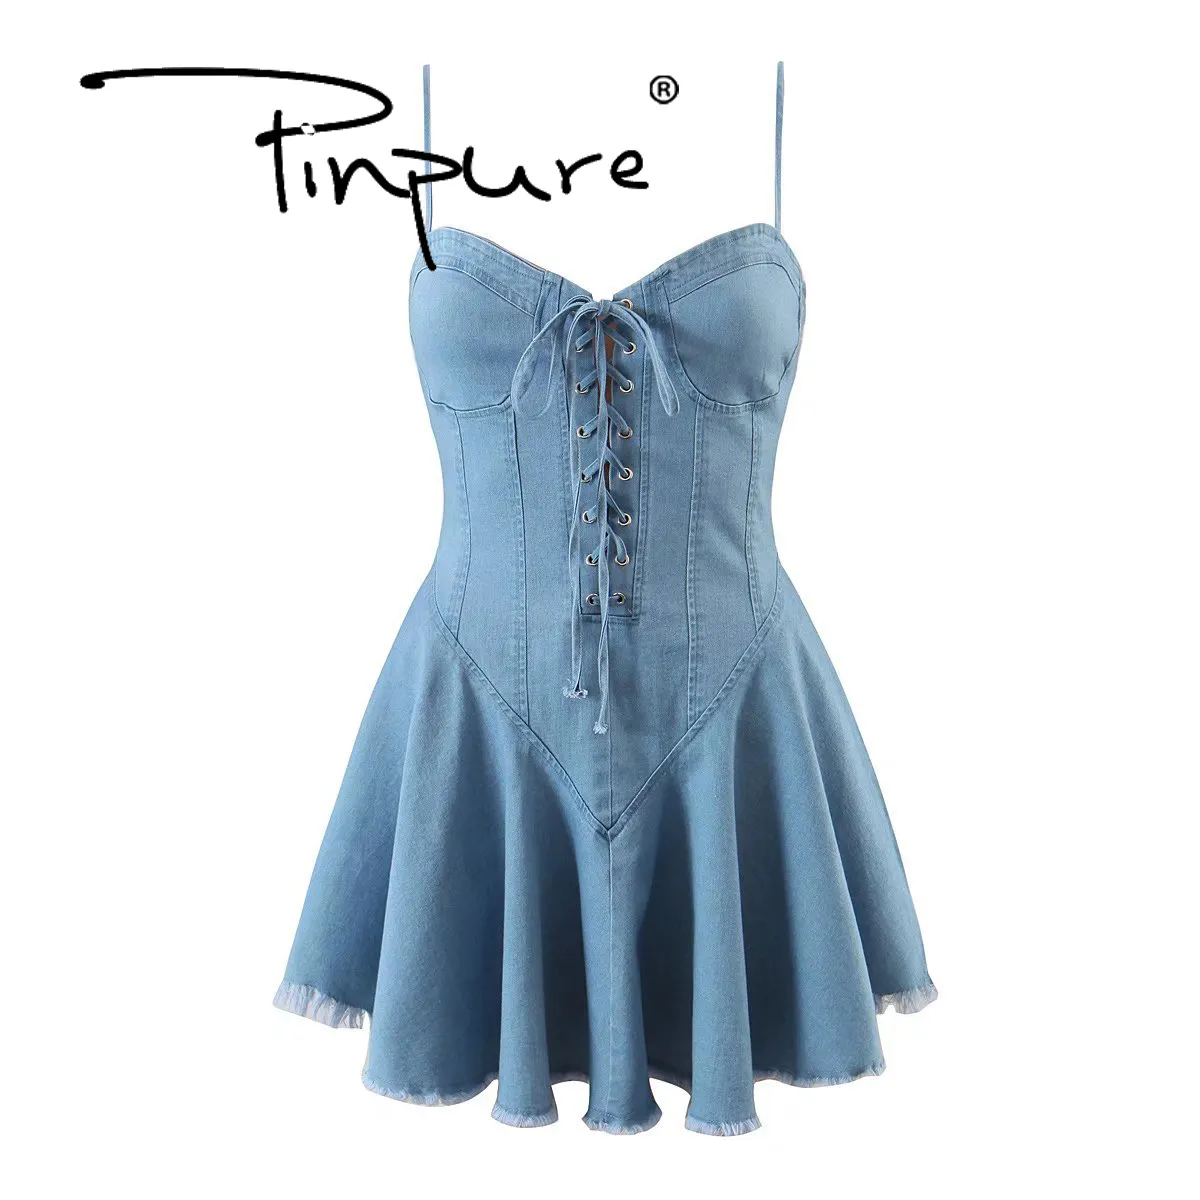 R30856S Women's summer new style European fashion solid color washed denim lace-up straps strapless backless dress party dresses